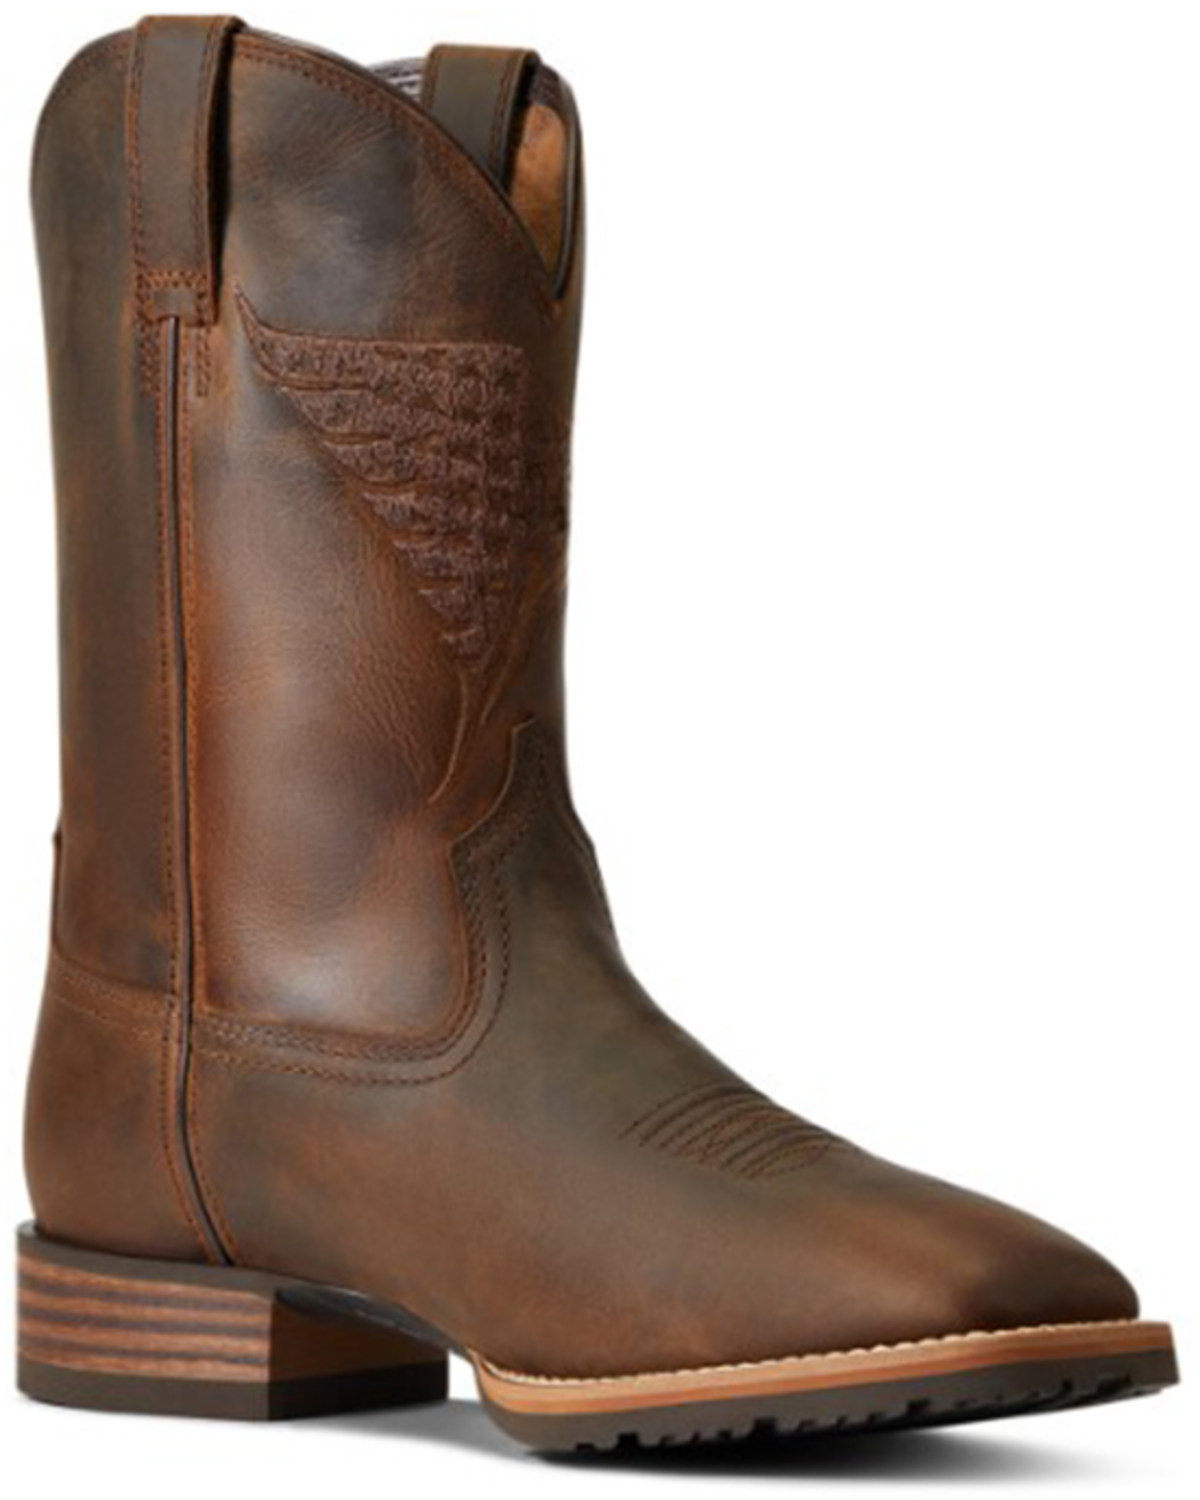 Ariat Men's Hybrid Fly High Performance Western Boots - Broad Square Toe